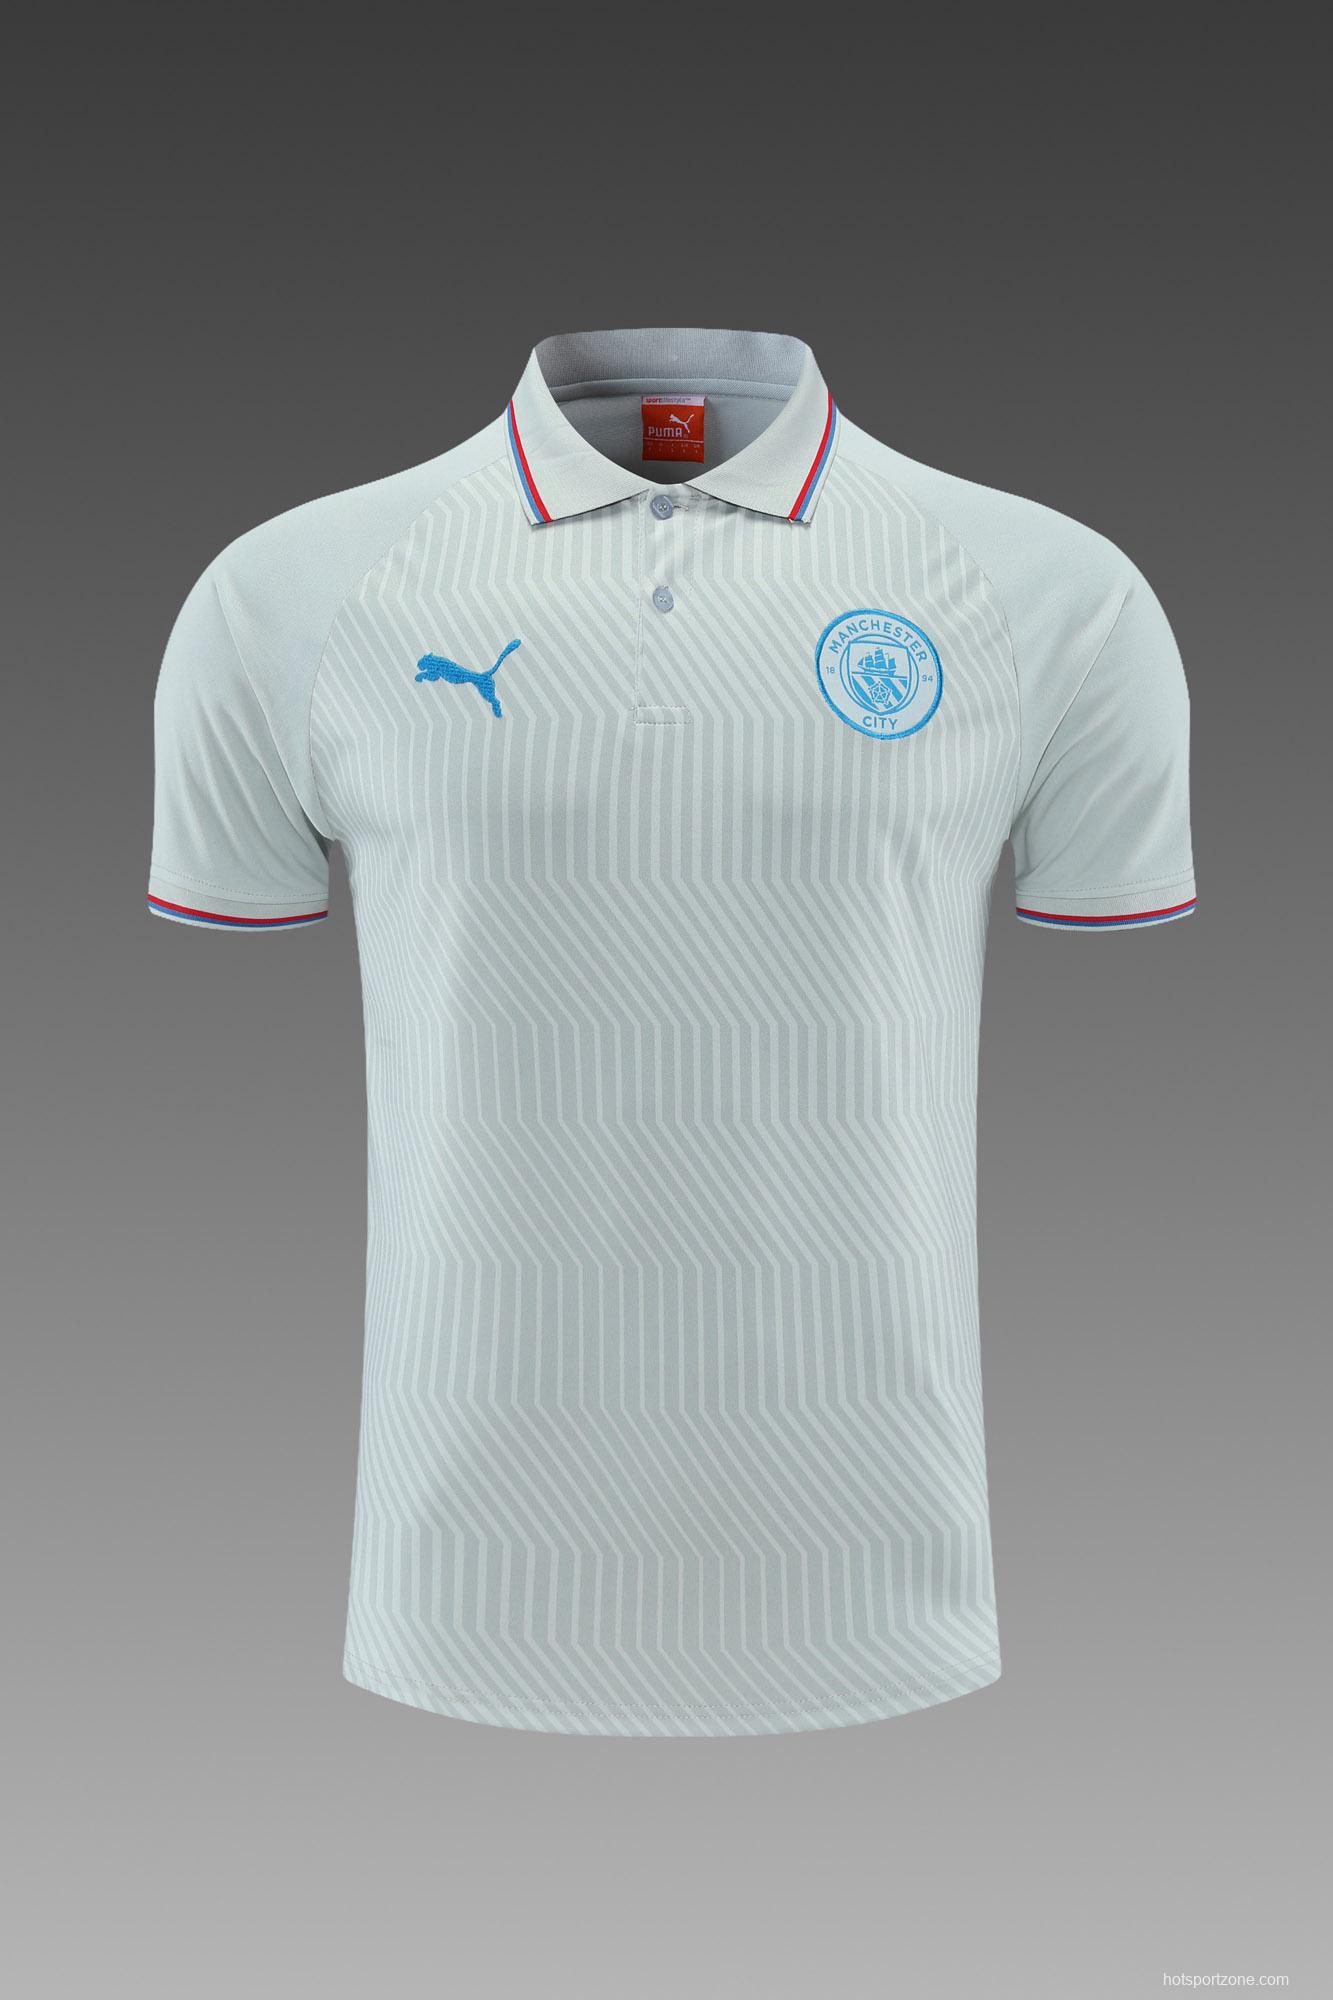 Manchester City POLO kit Light Grey (not supported to be sold separately)